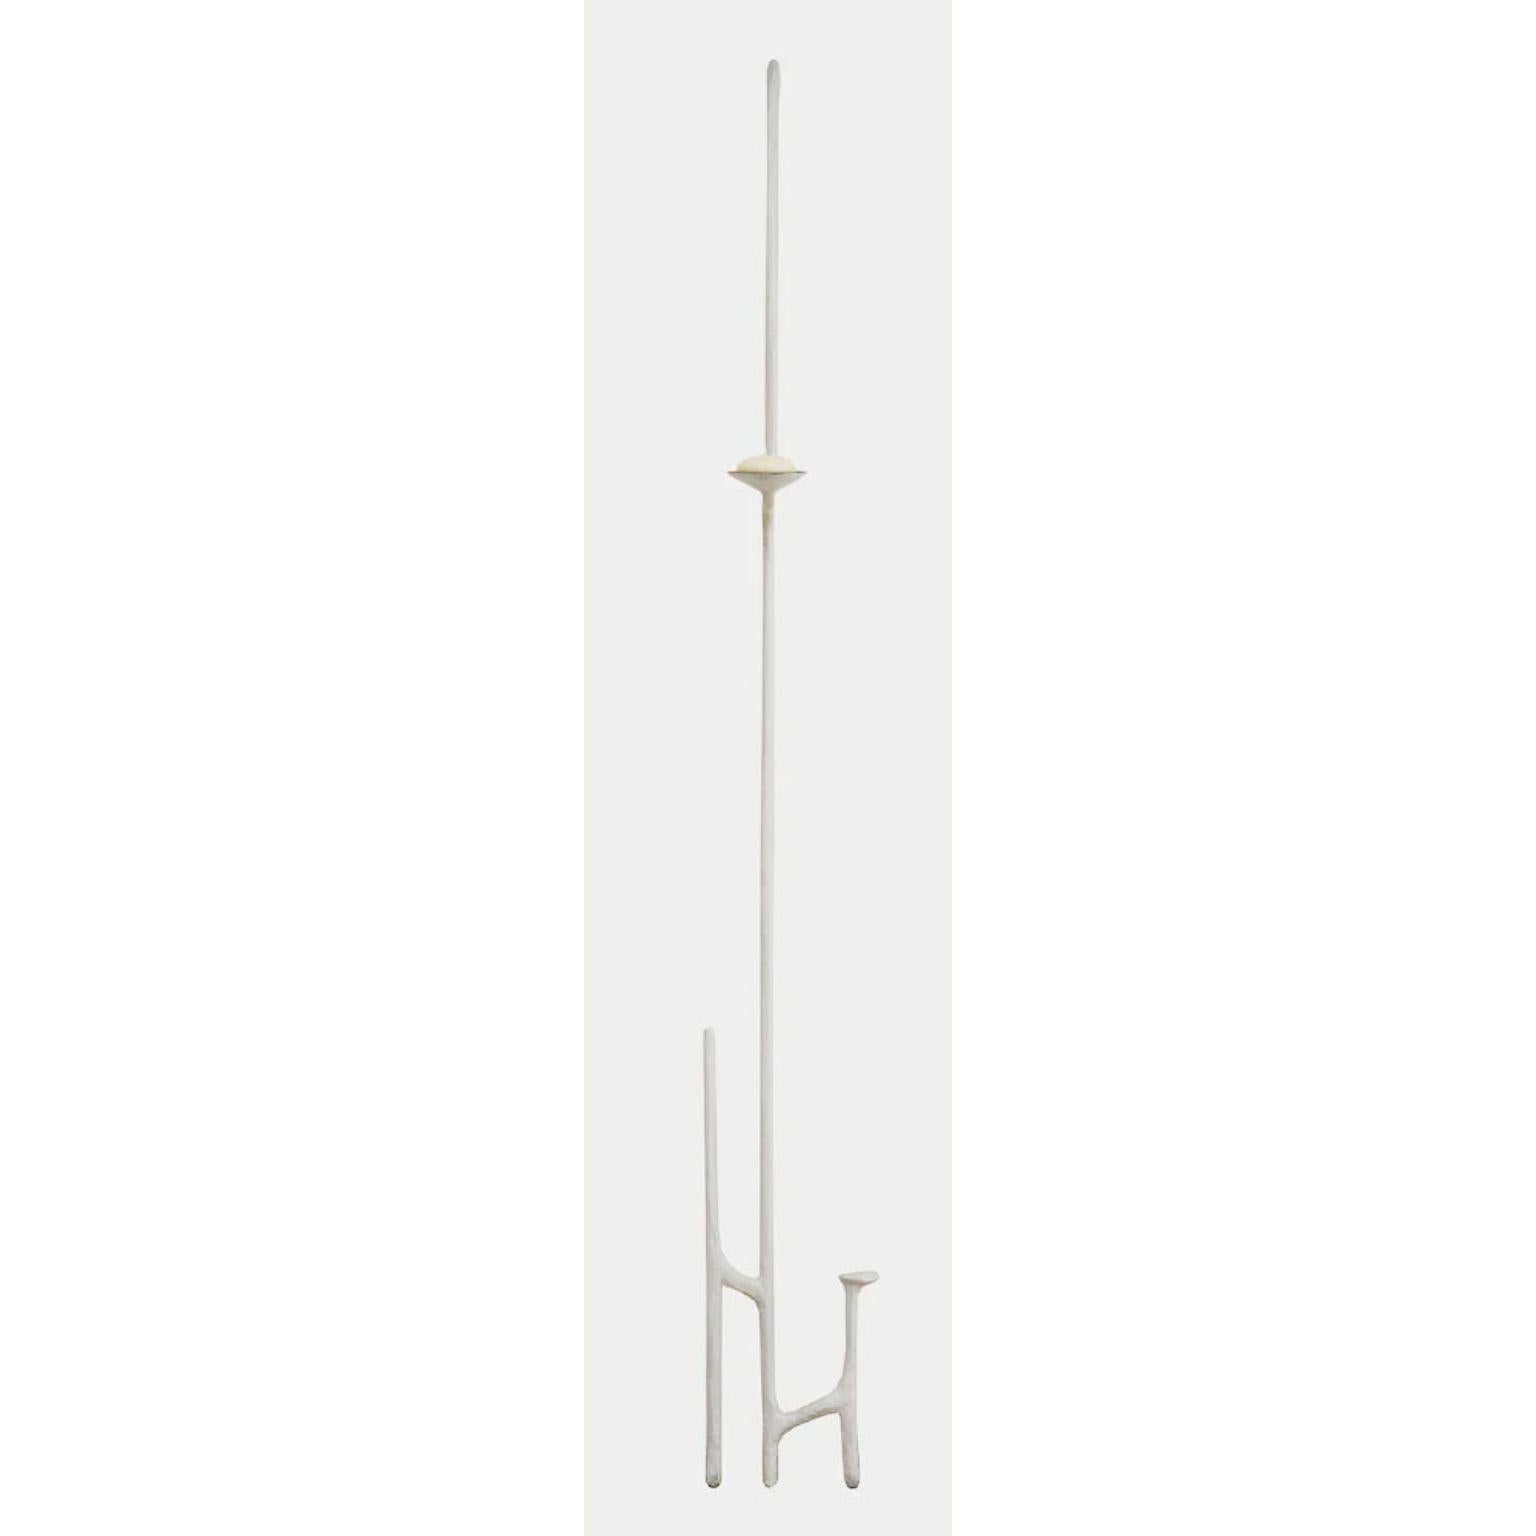 Giacometti white bronze leaning candlestick by Mary Brogger.
Dimensions: W 33 cm x D 5 cm x H 196 cm.
Materials: white patinated bronze.
Also available in other finishes and dimensions.

Mary Brogger is an internationally recognized artist